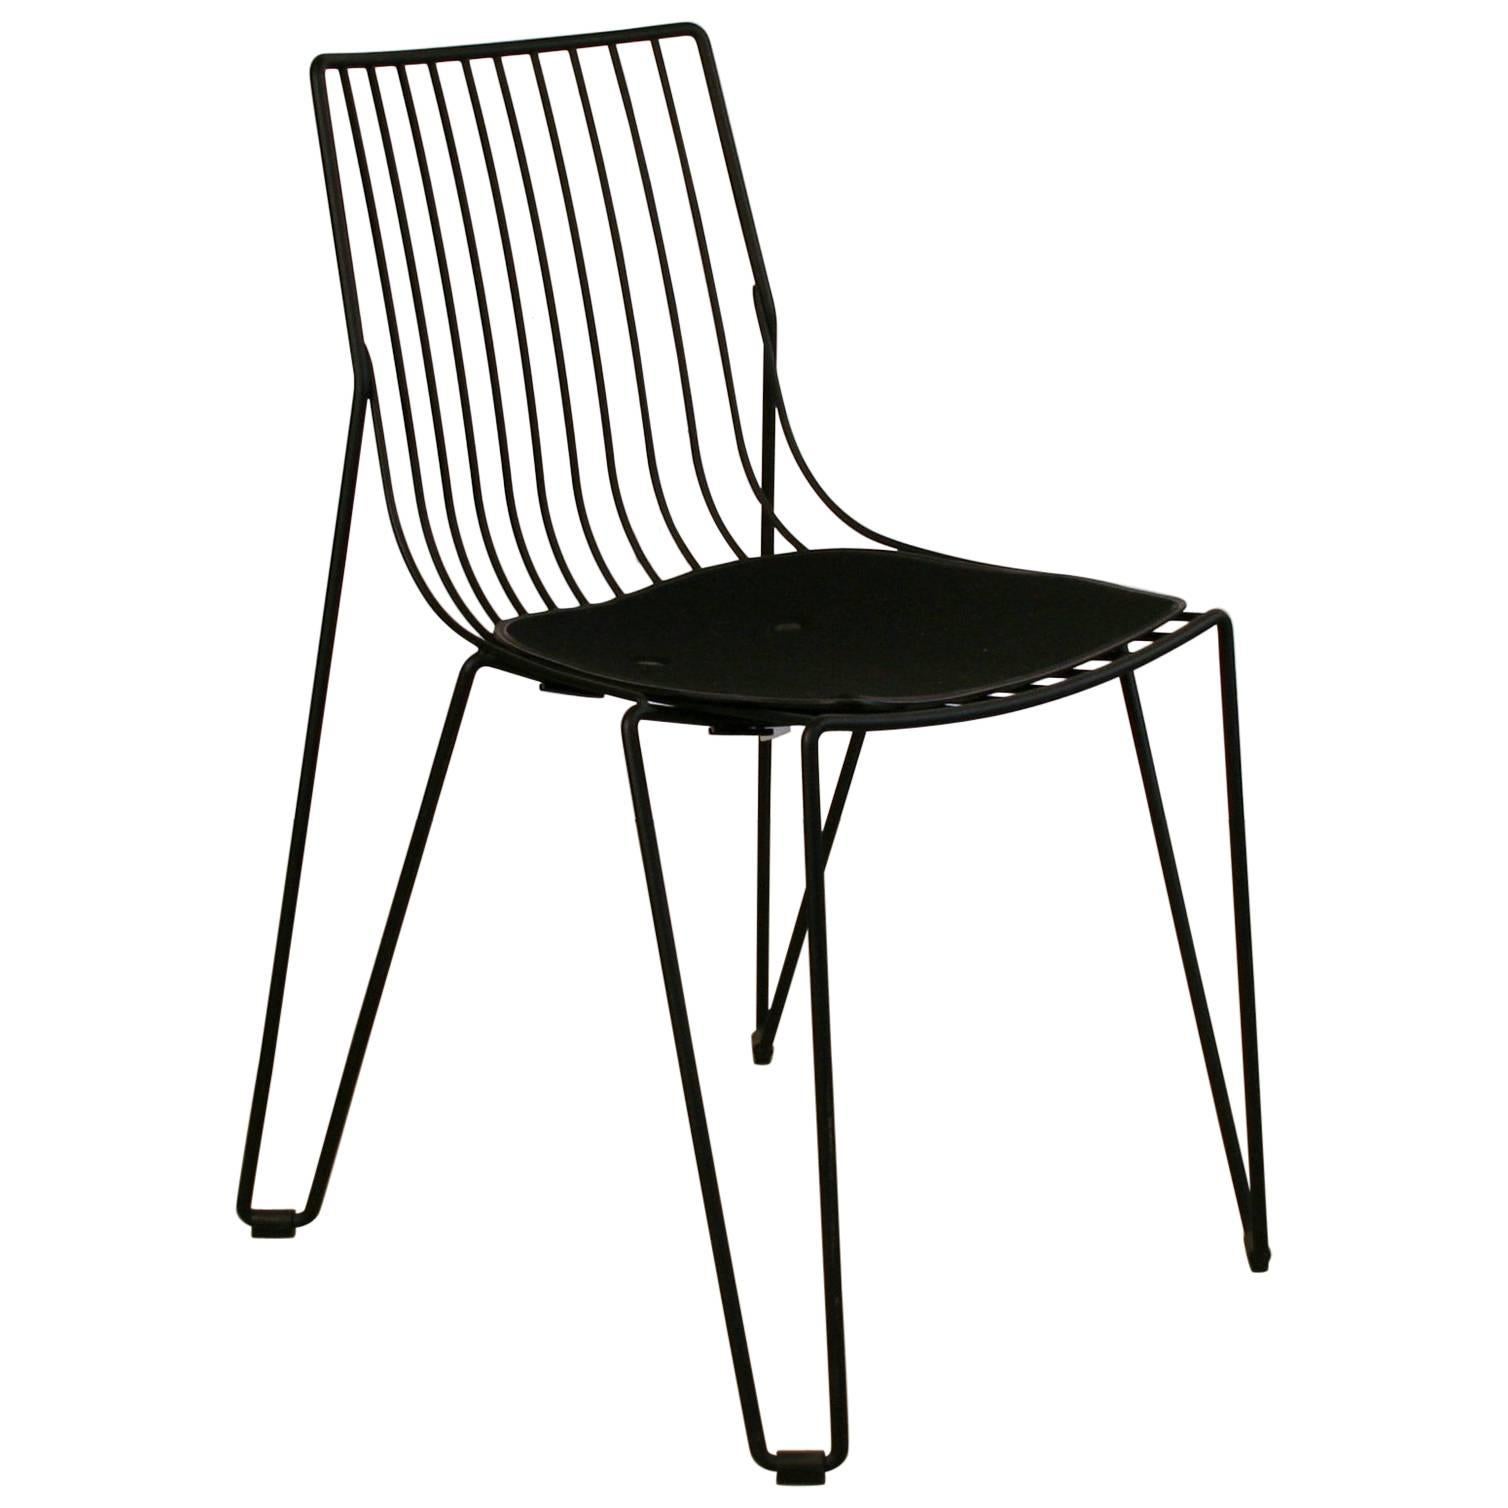 Tio Black Dining Chair with Seat Pad by Mass Productions